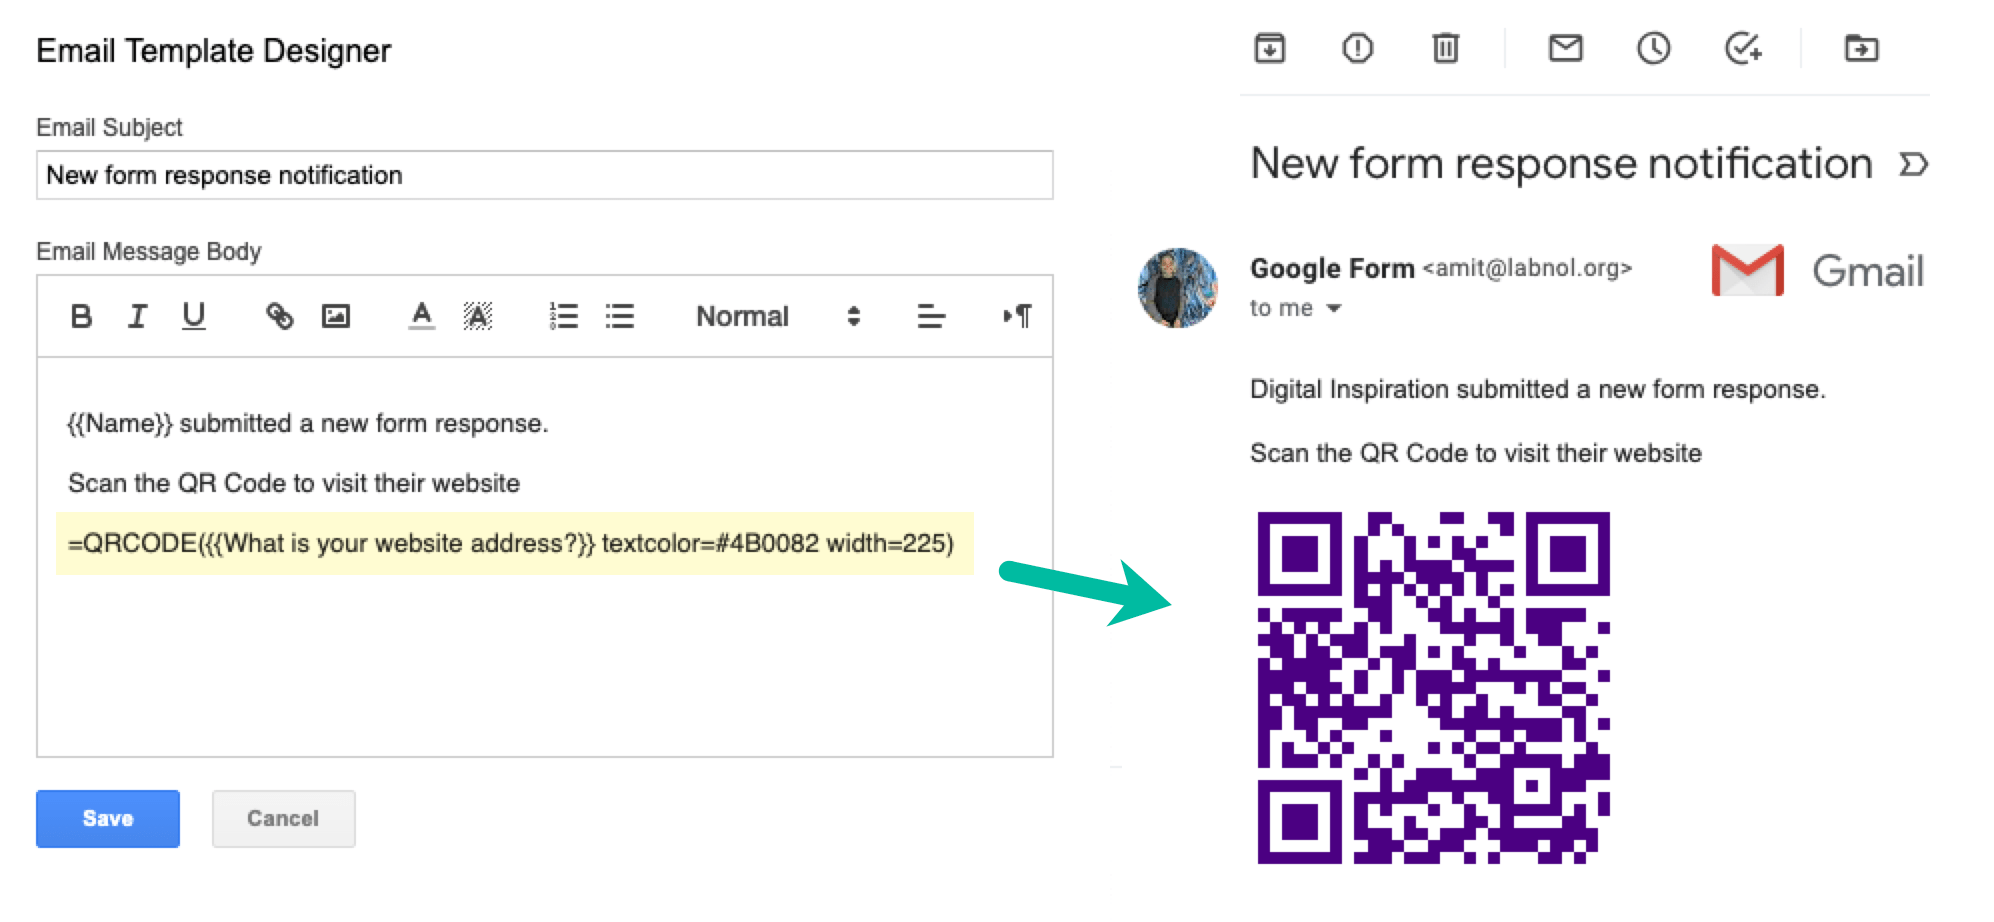 How To Embed Barcode And Qr Code In Google Form Emails Digital Inspiration